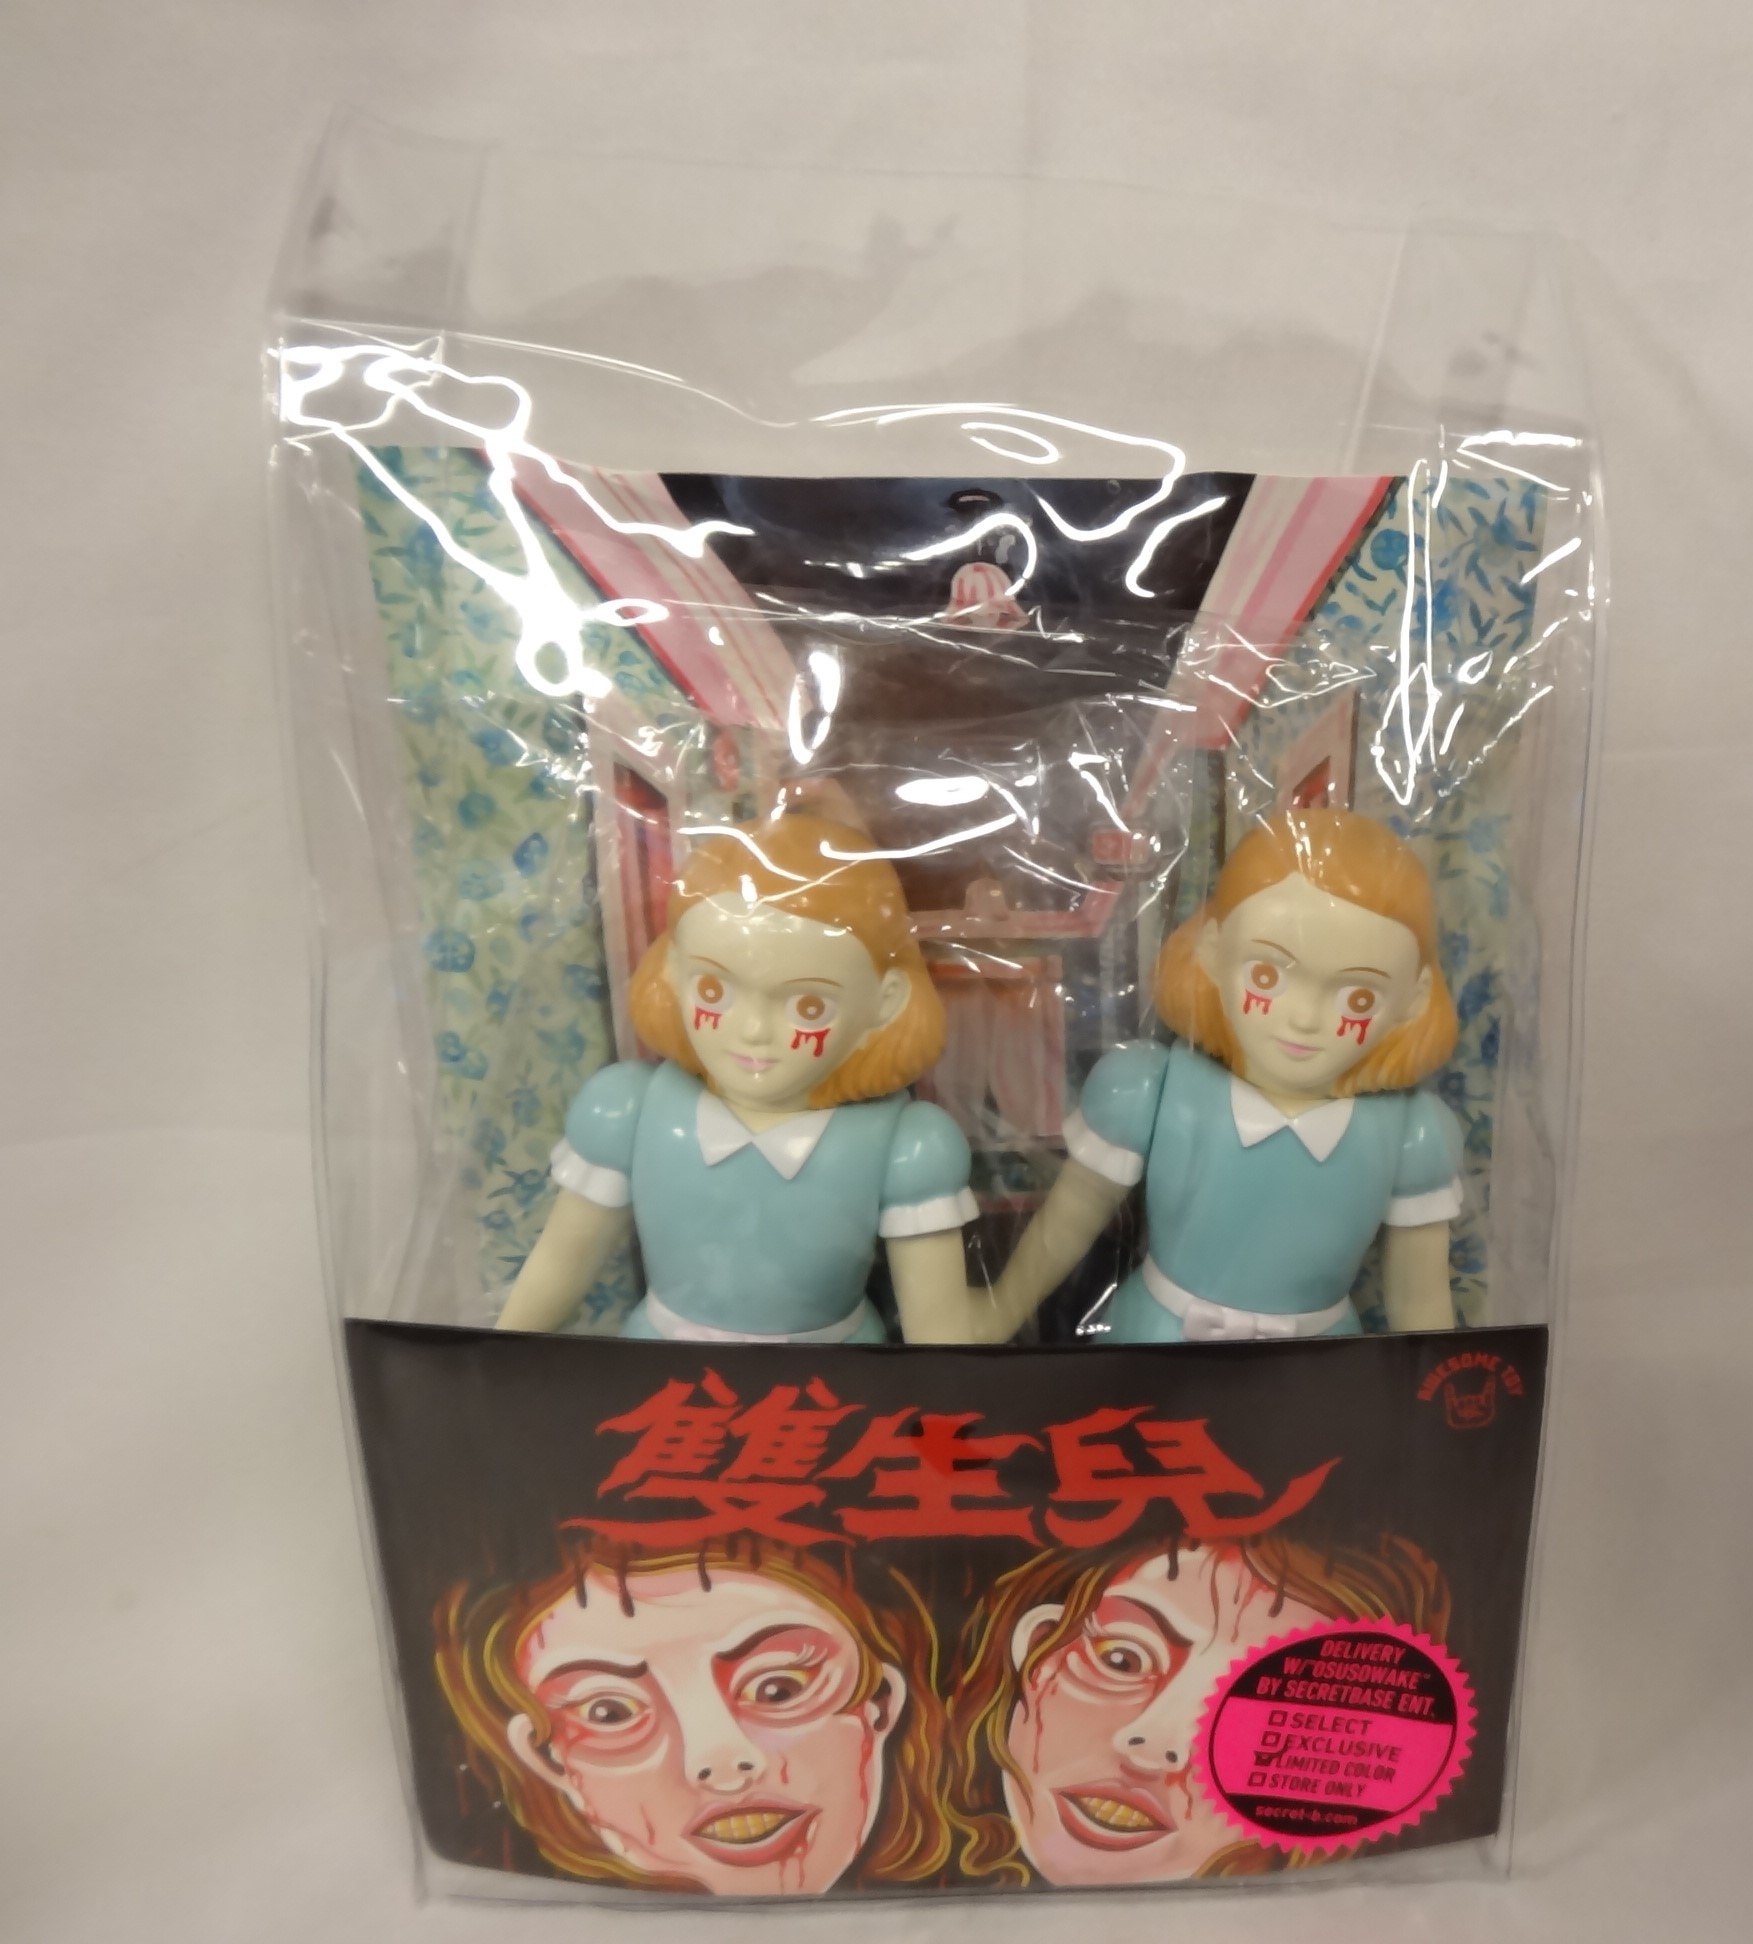 AWESOME TOY SECRETBASE The Twins Exclusive Limited Colorway